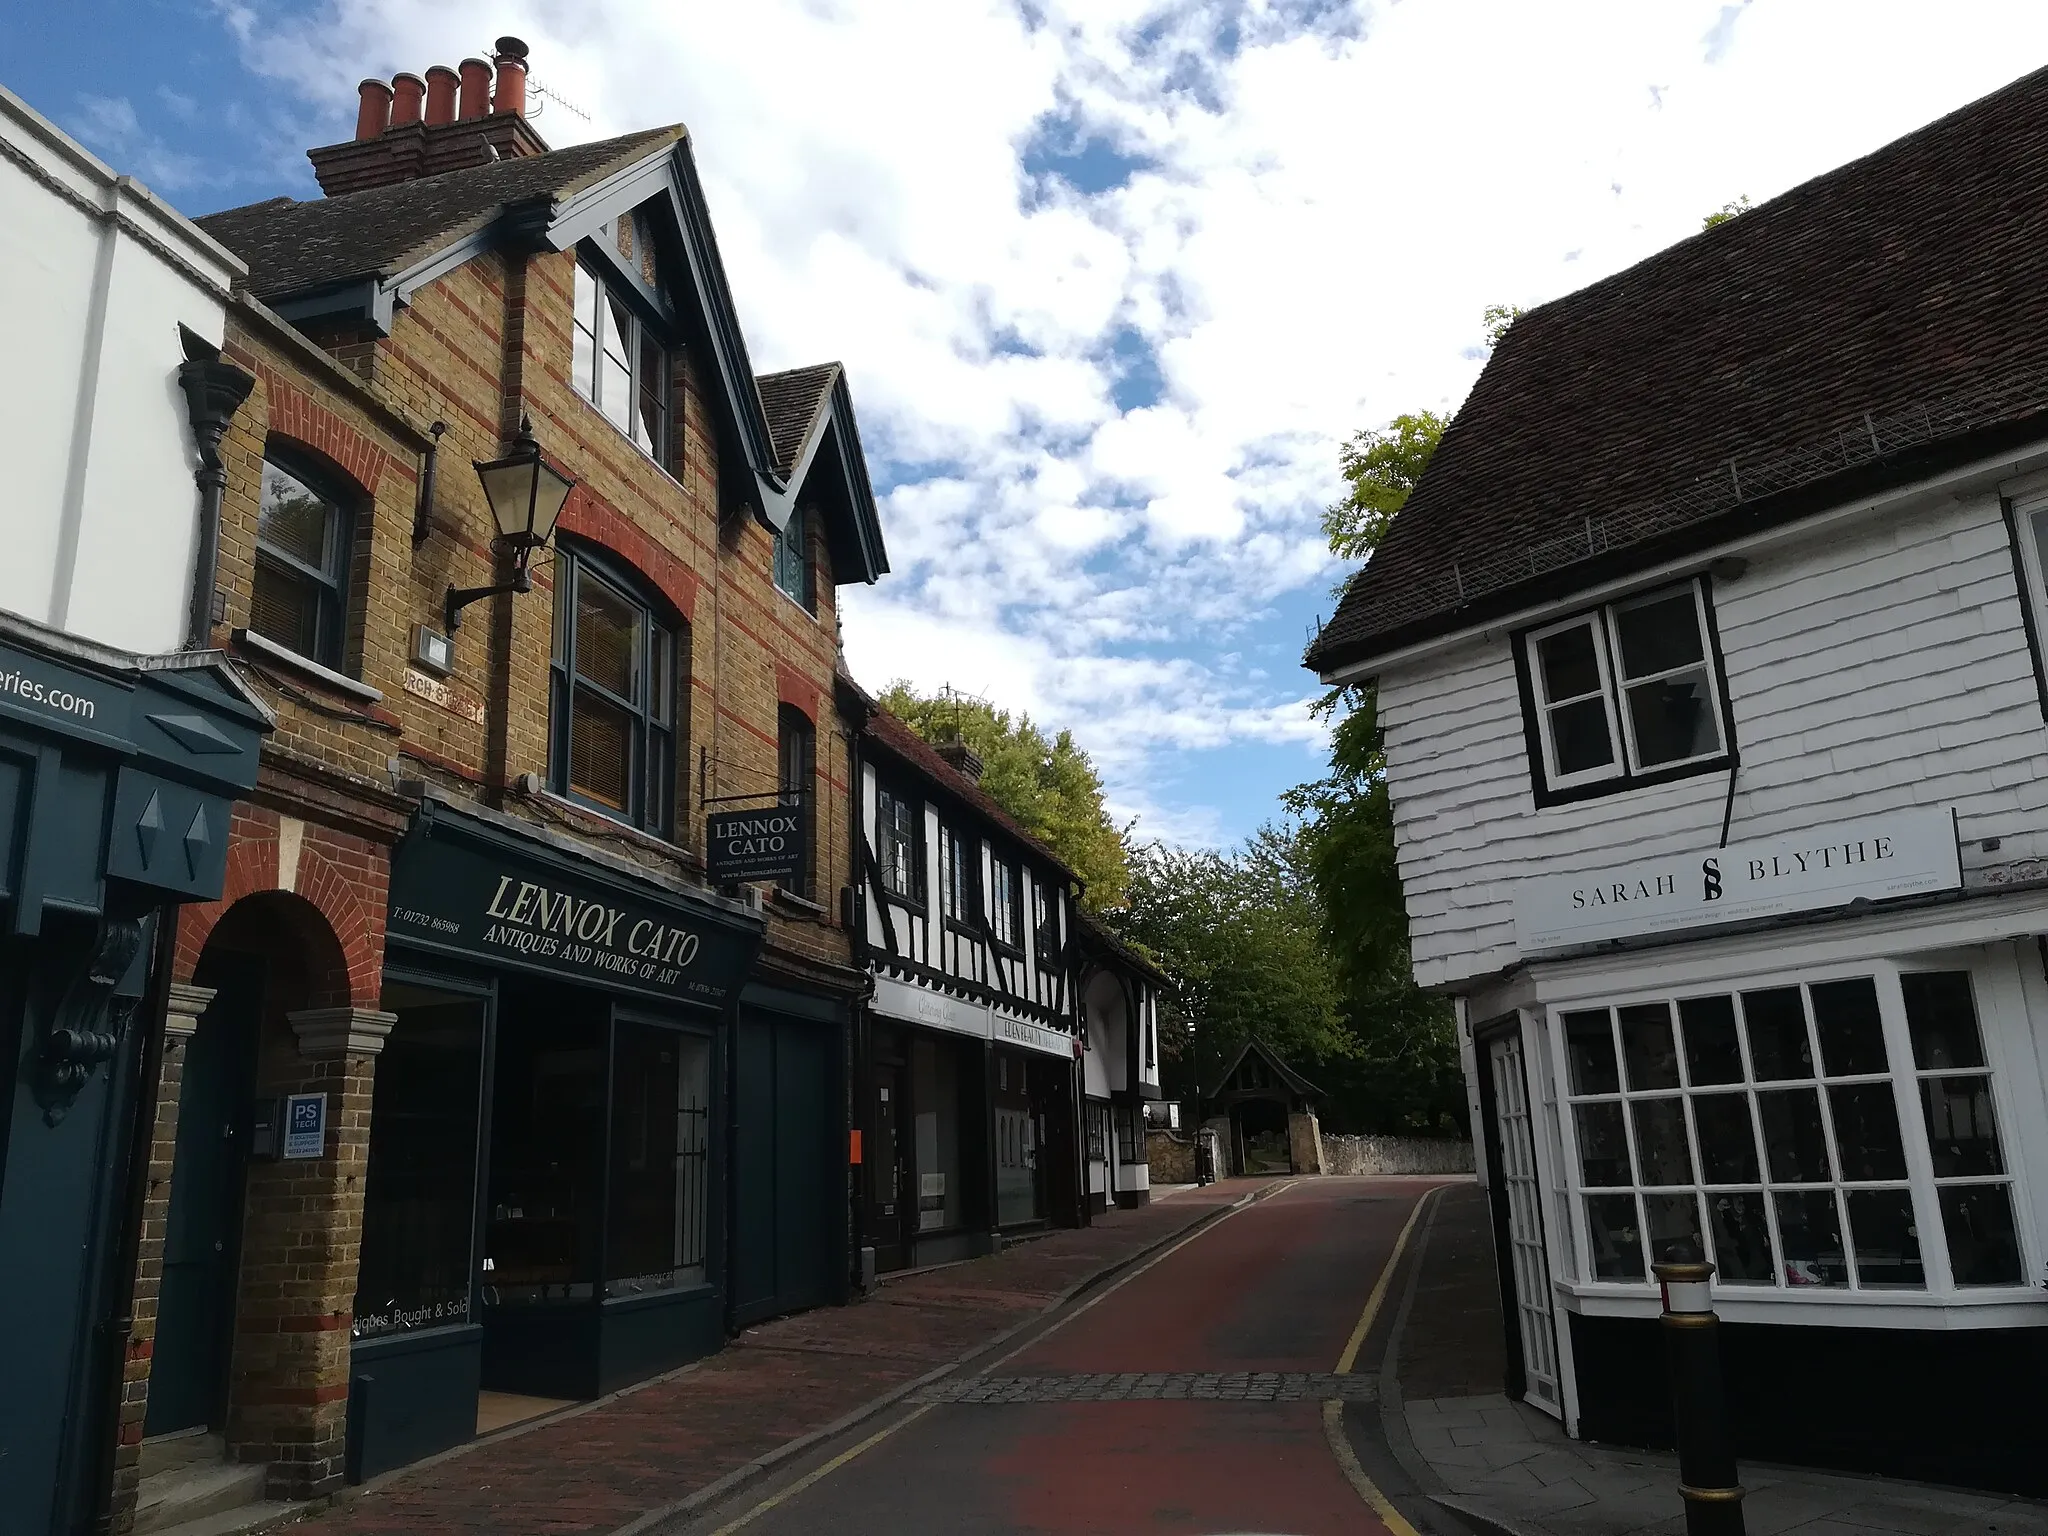 Photo showing: A photograph of the old town of edenbridge taken in 2018